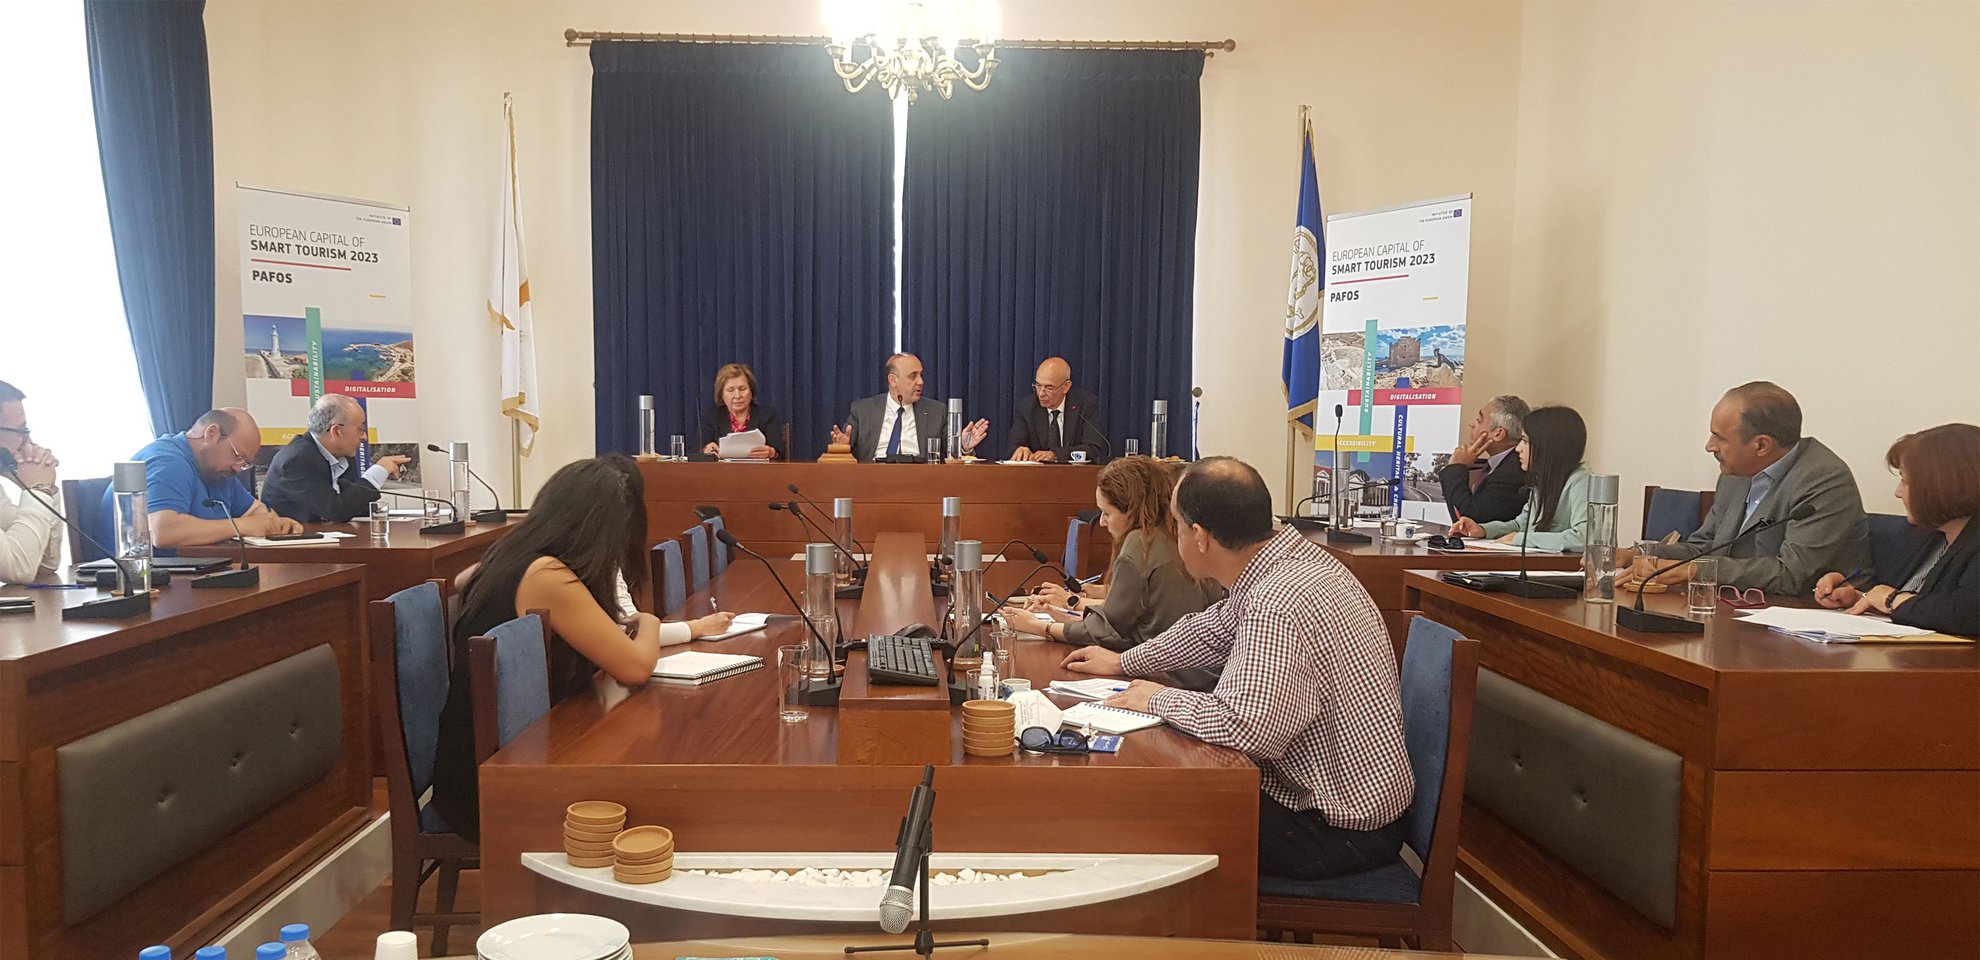 image Long-term strategies discussed for road development in Paphos